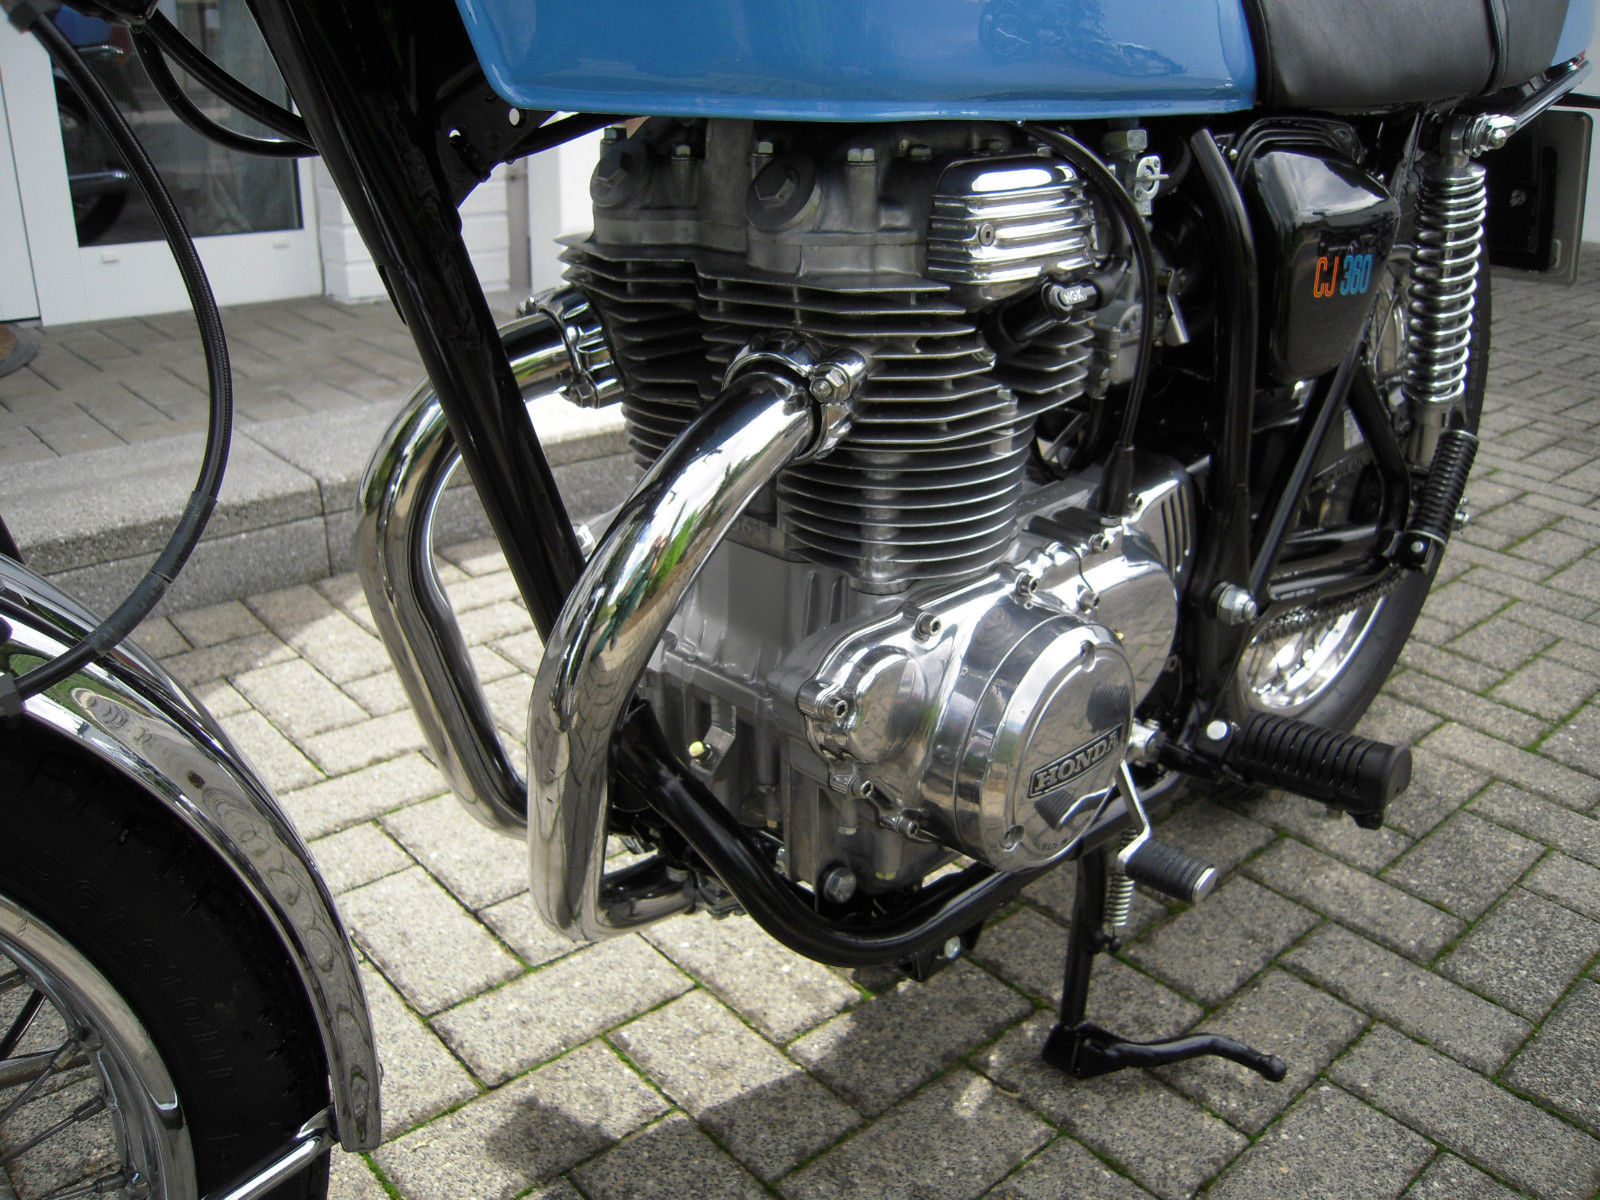 Honda CB360 - 1979 - Engine and Gearbox, Motor and Transmission, Exhaust Pipes and Frame Down Tube.